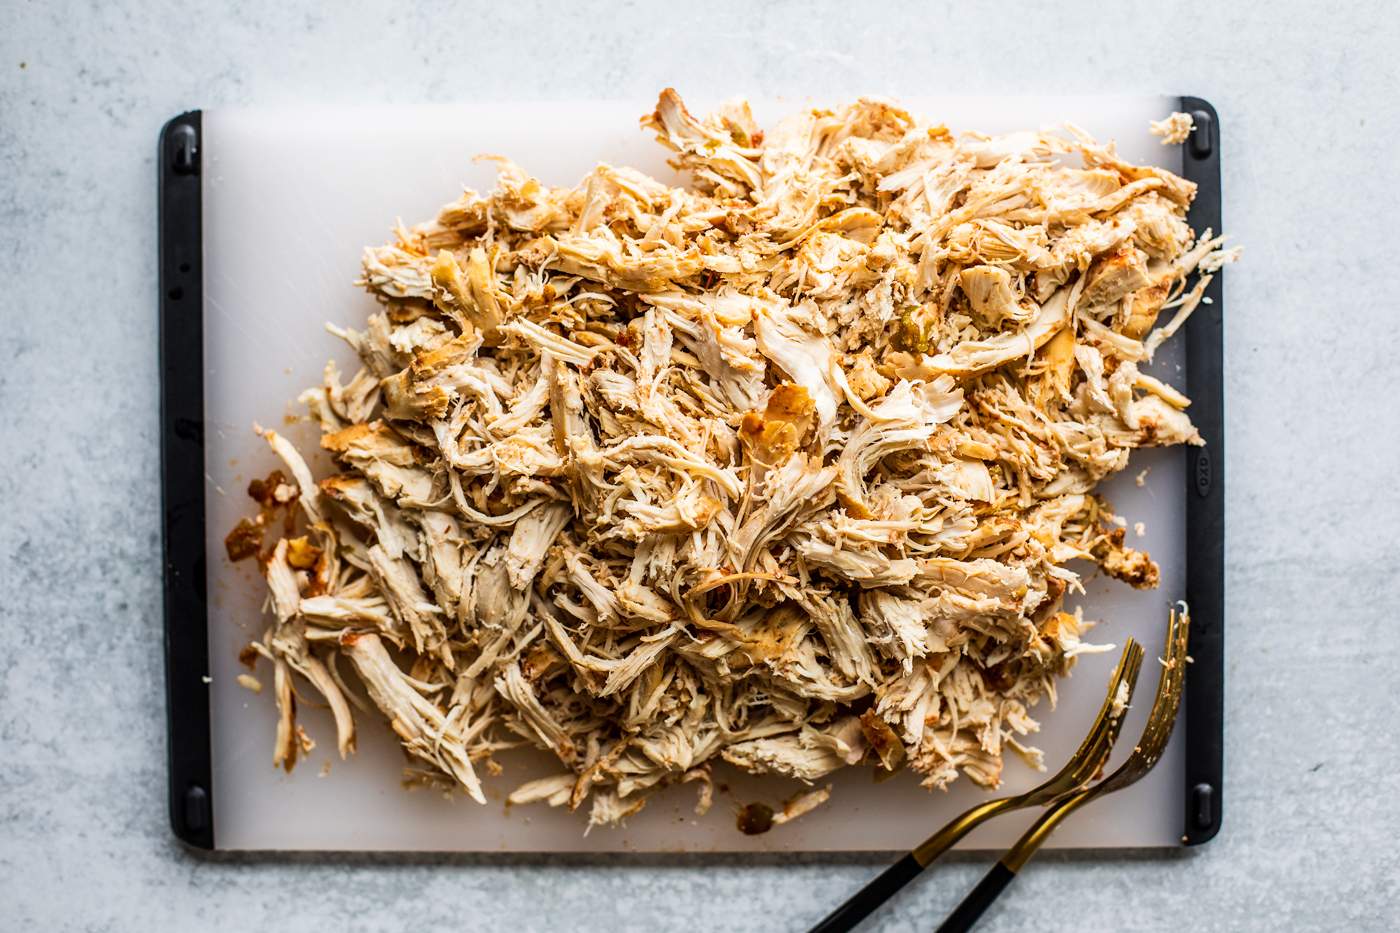 Shredded chicken on a cutting board with two forks.